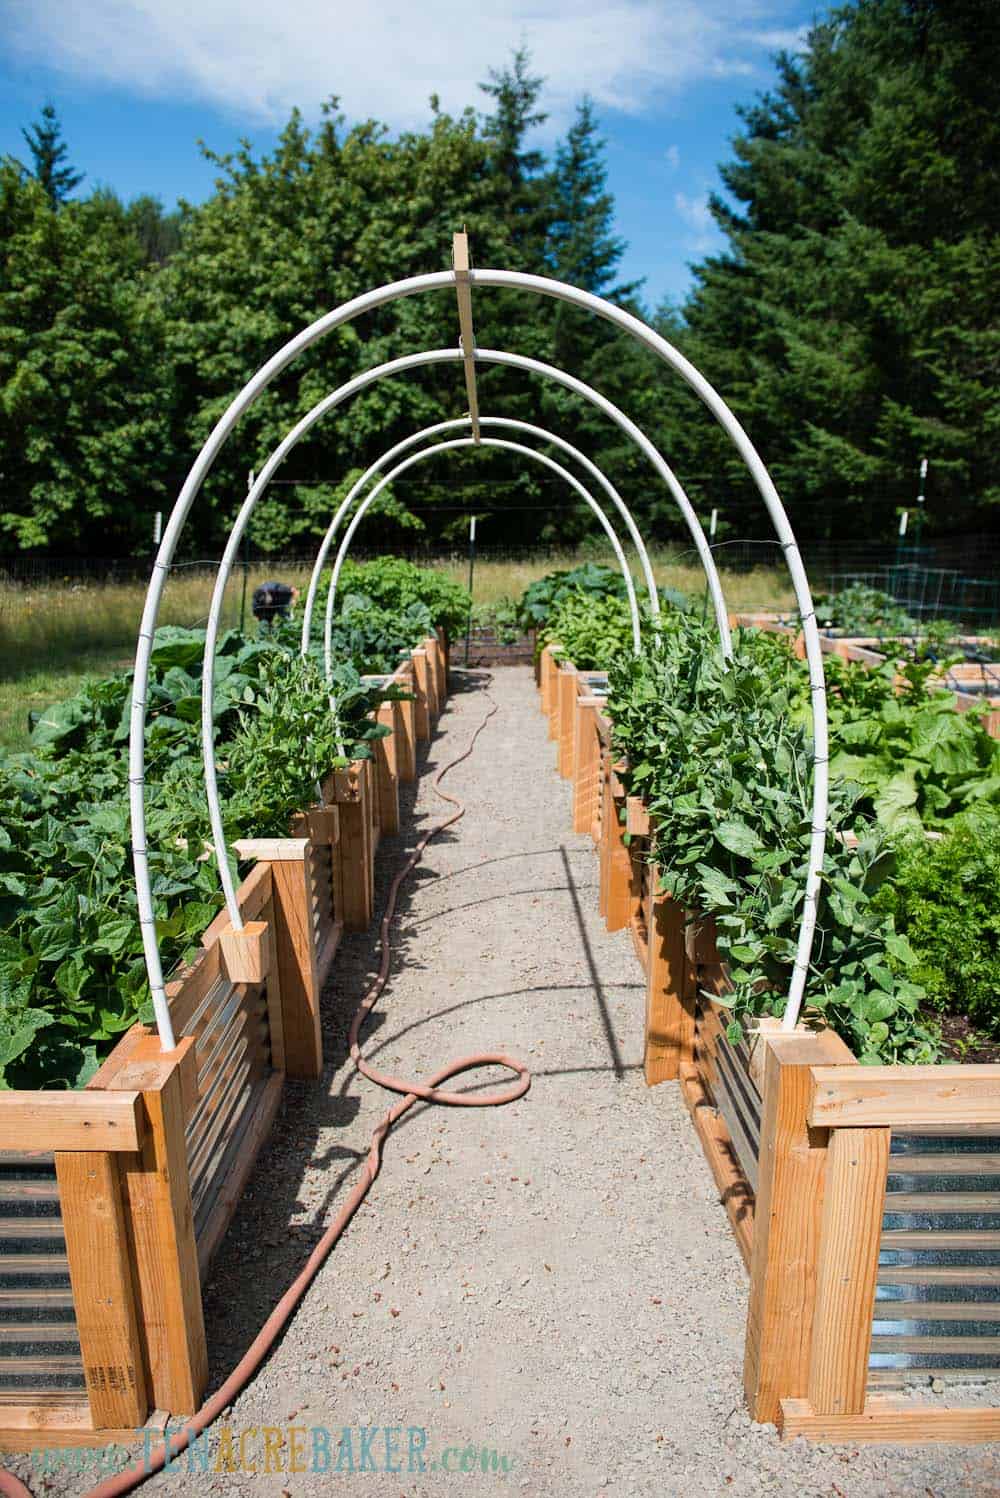 How to Make a Garden Arch With Pvc Pipe